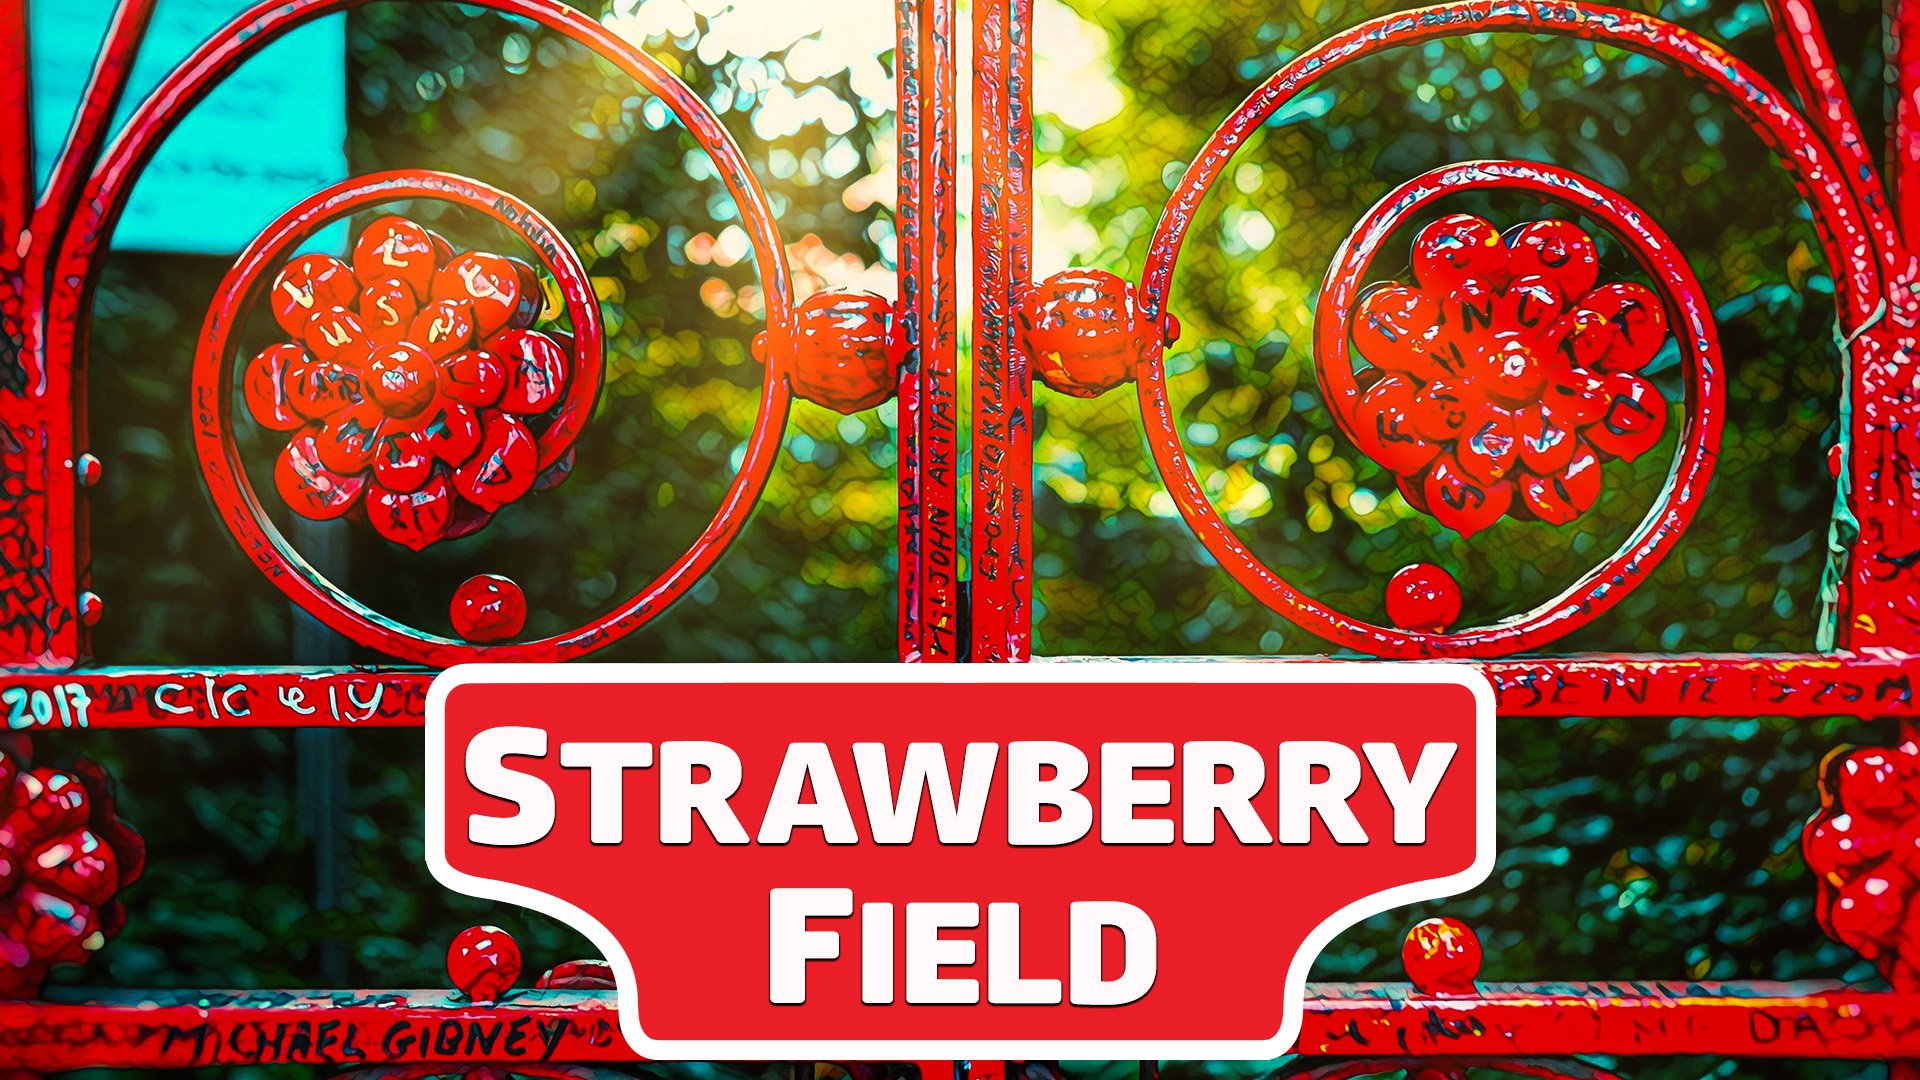 Strawberry Field - The inspiration for the Beatles classic Strawberry Fields Forever